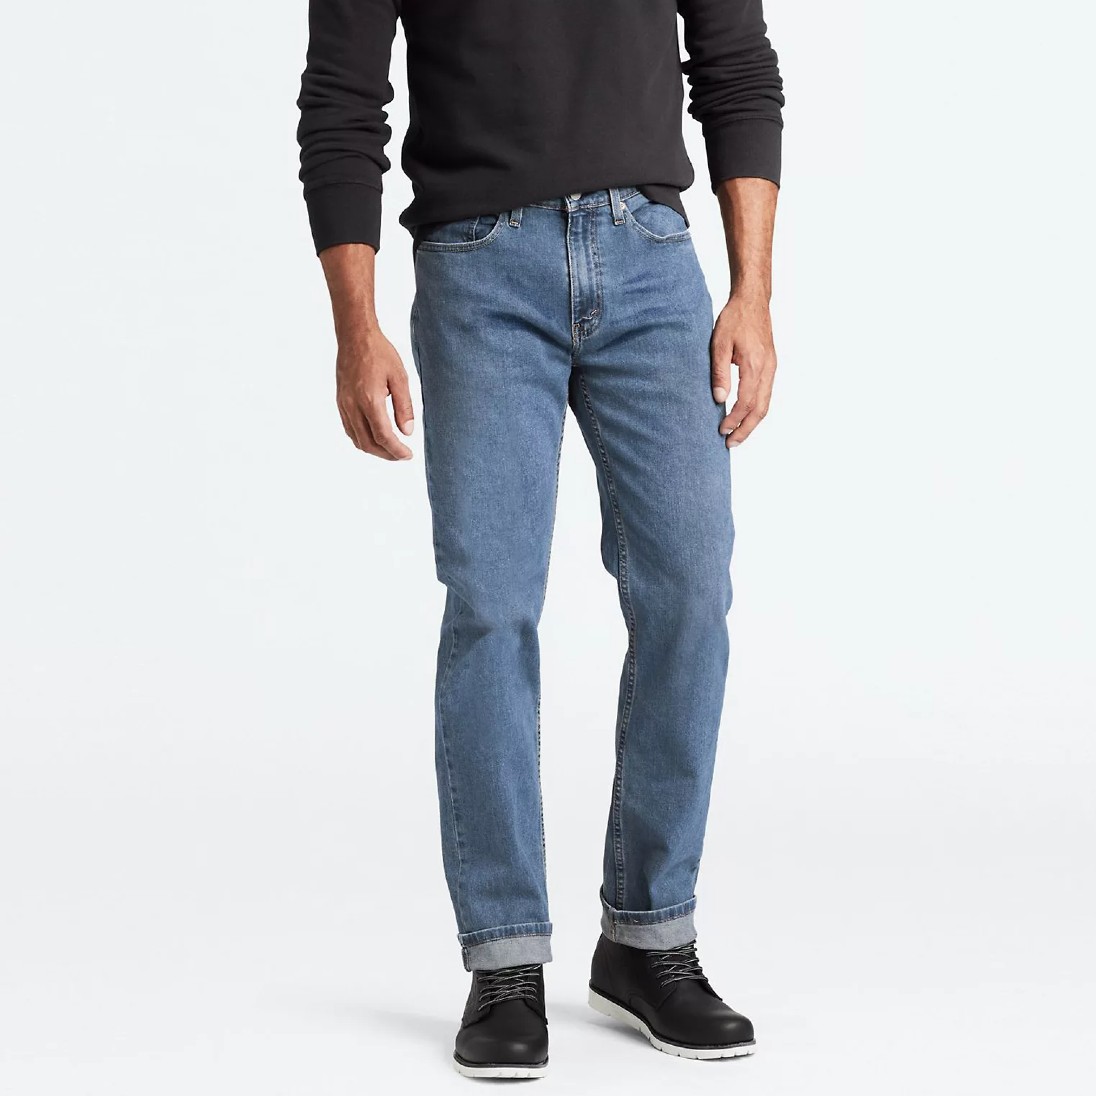 Mens Clothing Store Online | Jeans, Jackets & Tops | Hores Stores